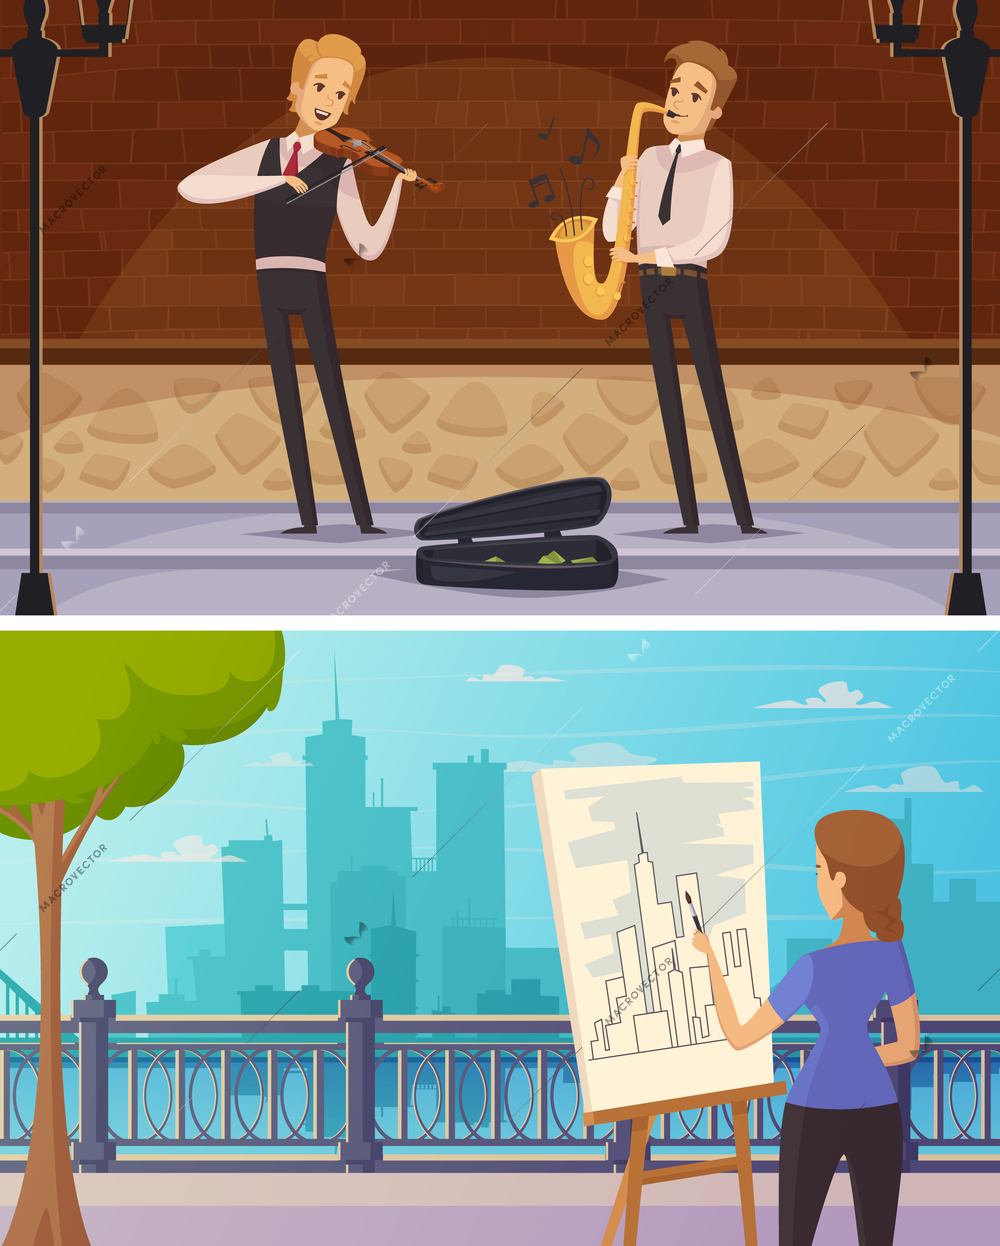 Street artists cartoon horizontal banners with girl at easel and musicians playing outdoor flat vector illustration